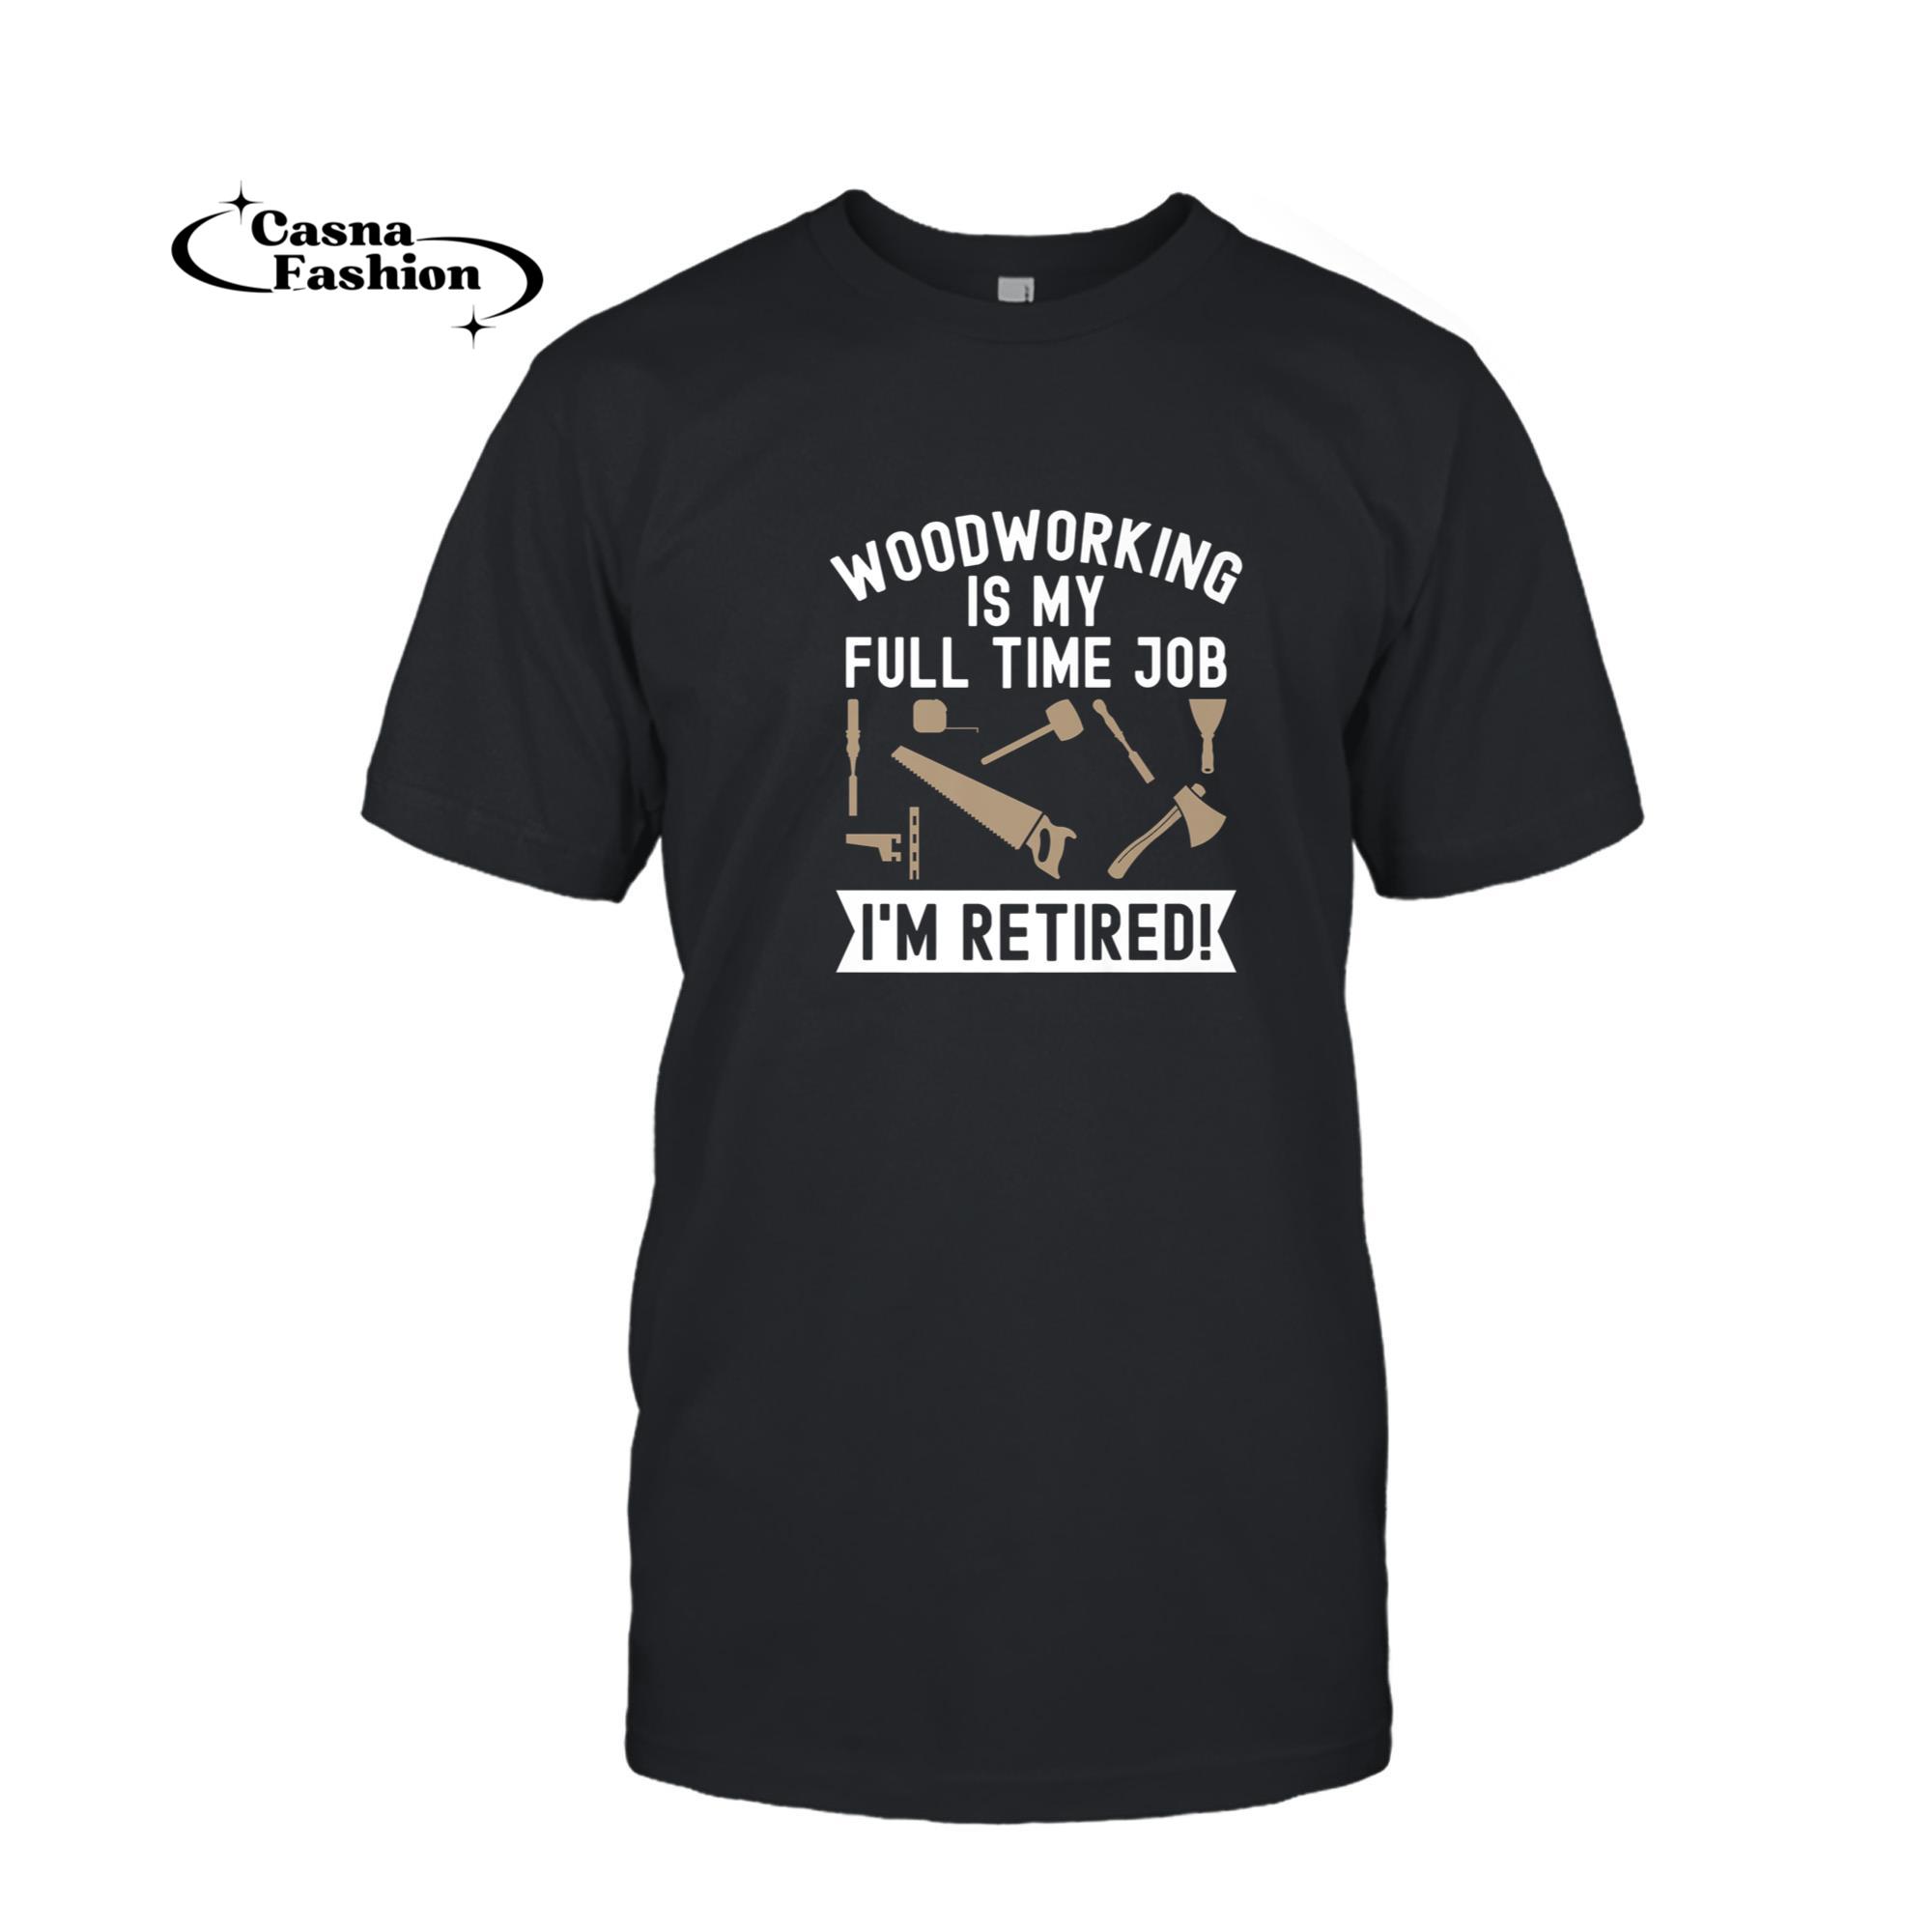 casnafashion_T-shirt_Woodworking Woodcarving Wood Carving Carpenter Wood Carver Premium T-Shirt_T-shirt_Black